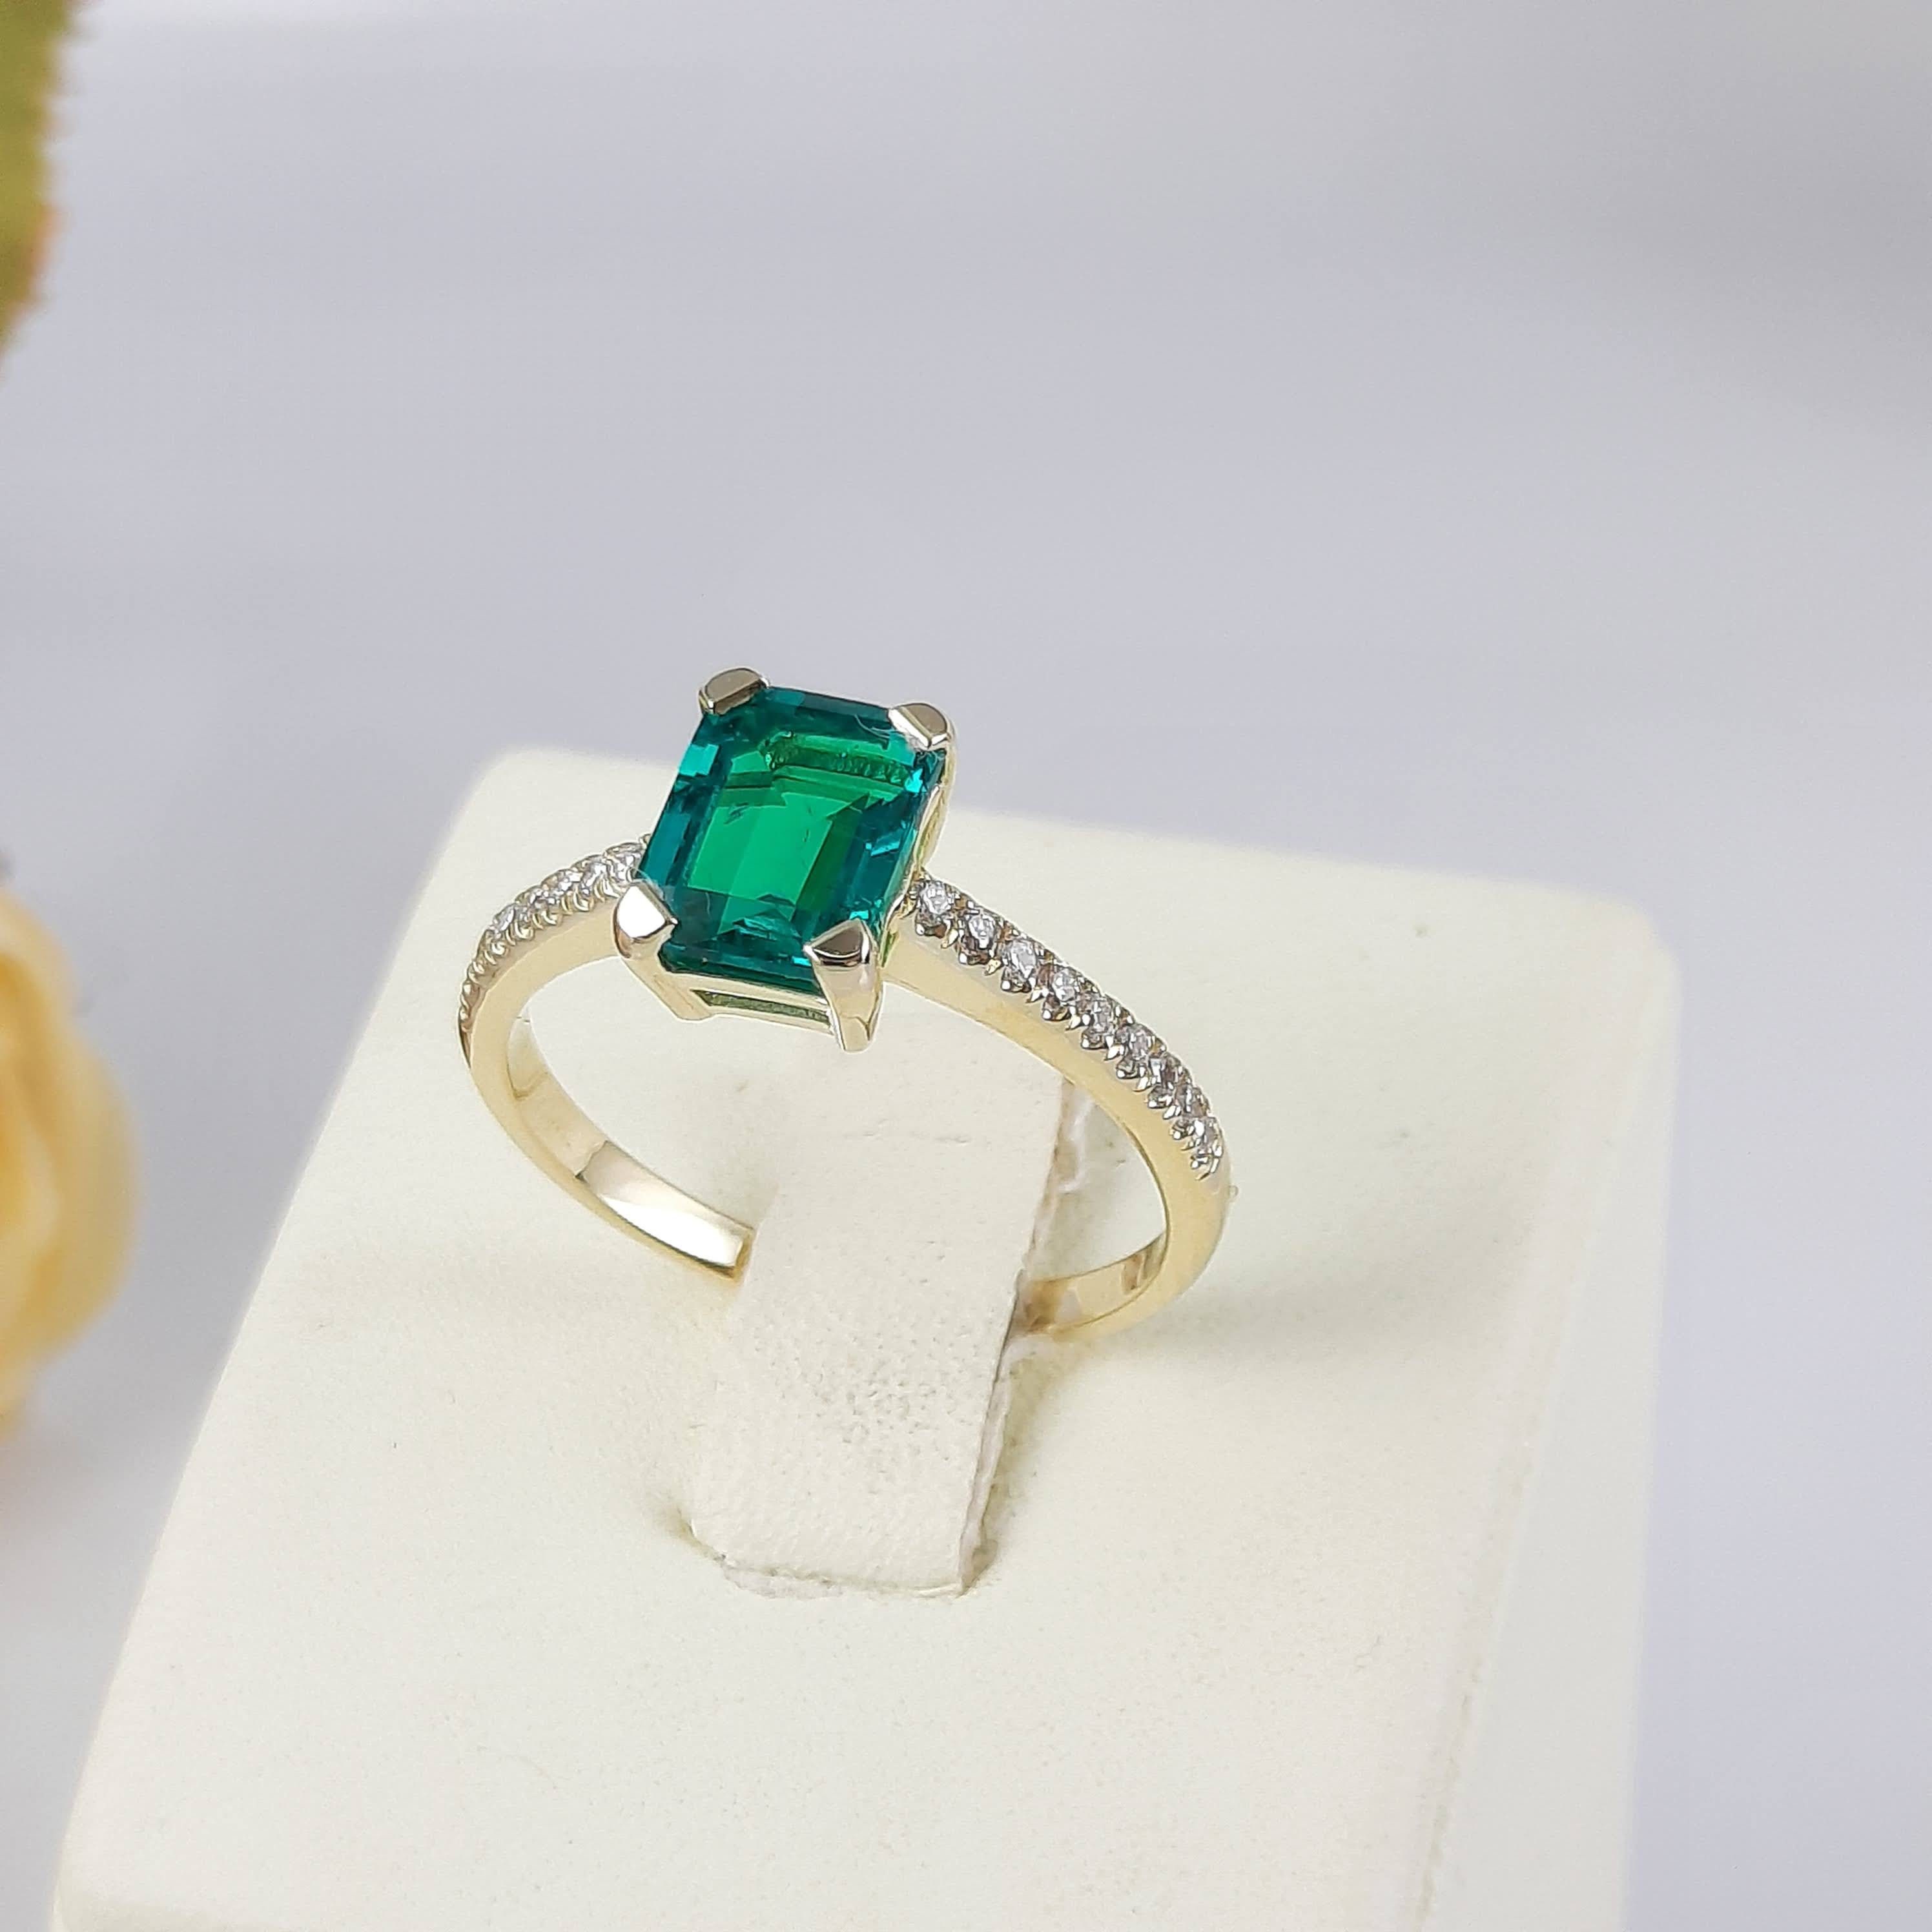 Emerald engagement ring 14k yellow gold emerald and diamond | Etsy